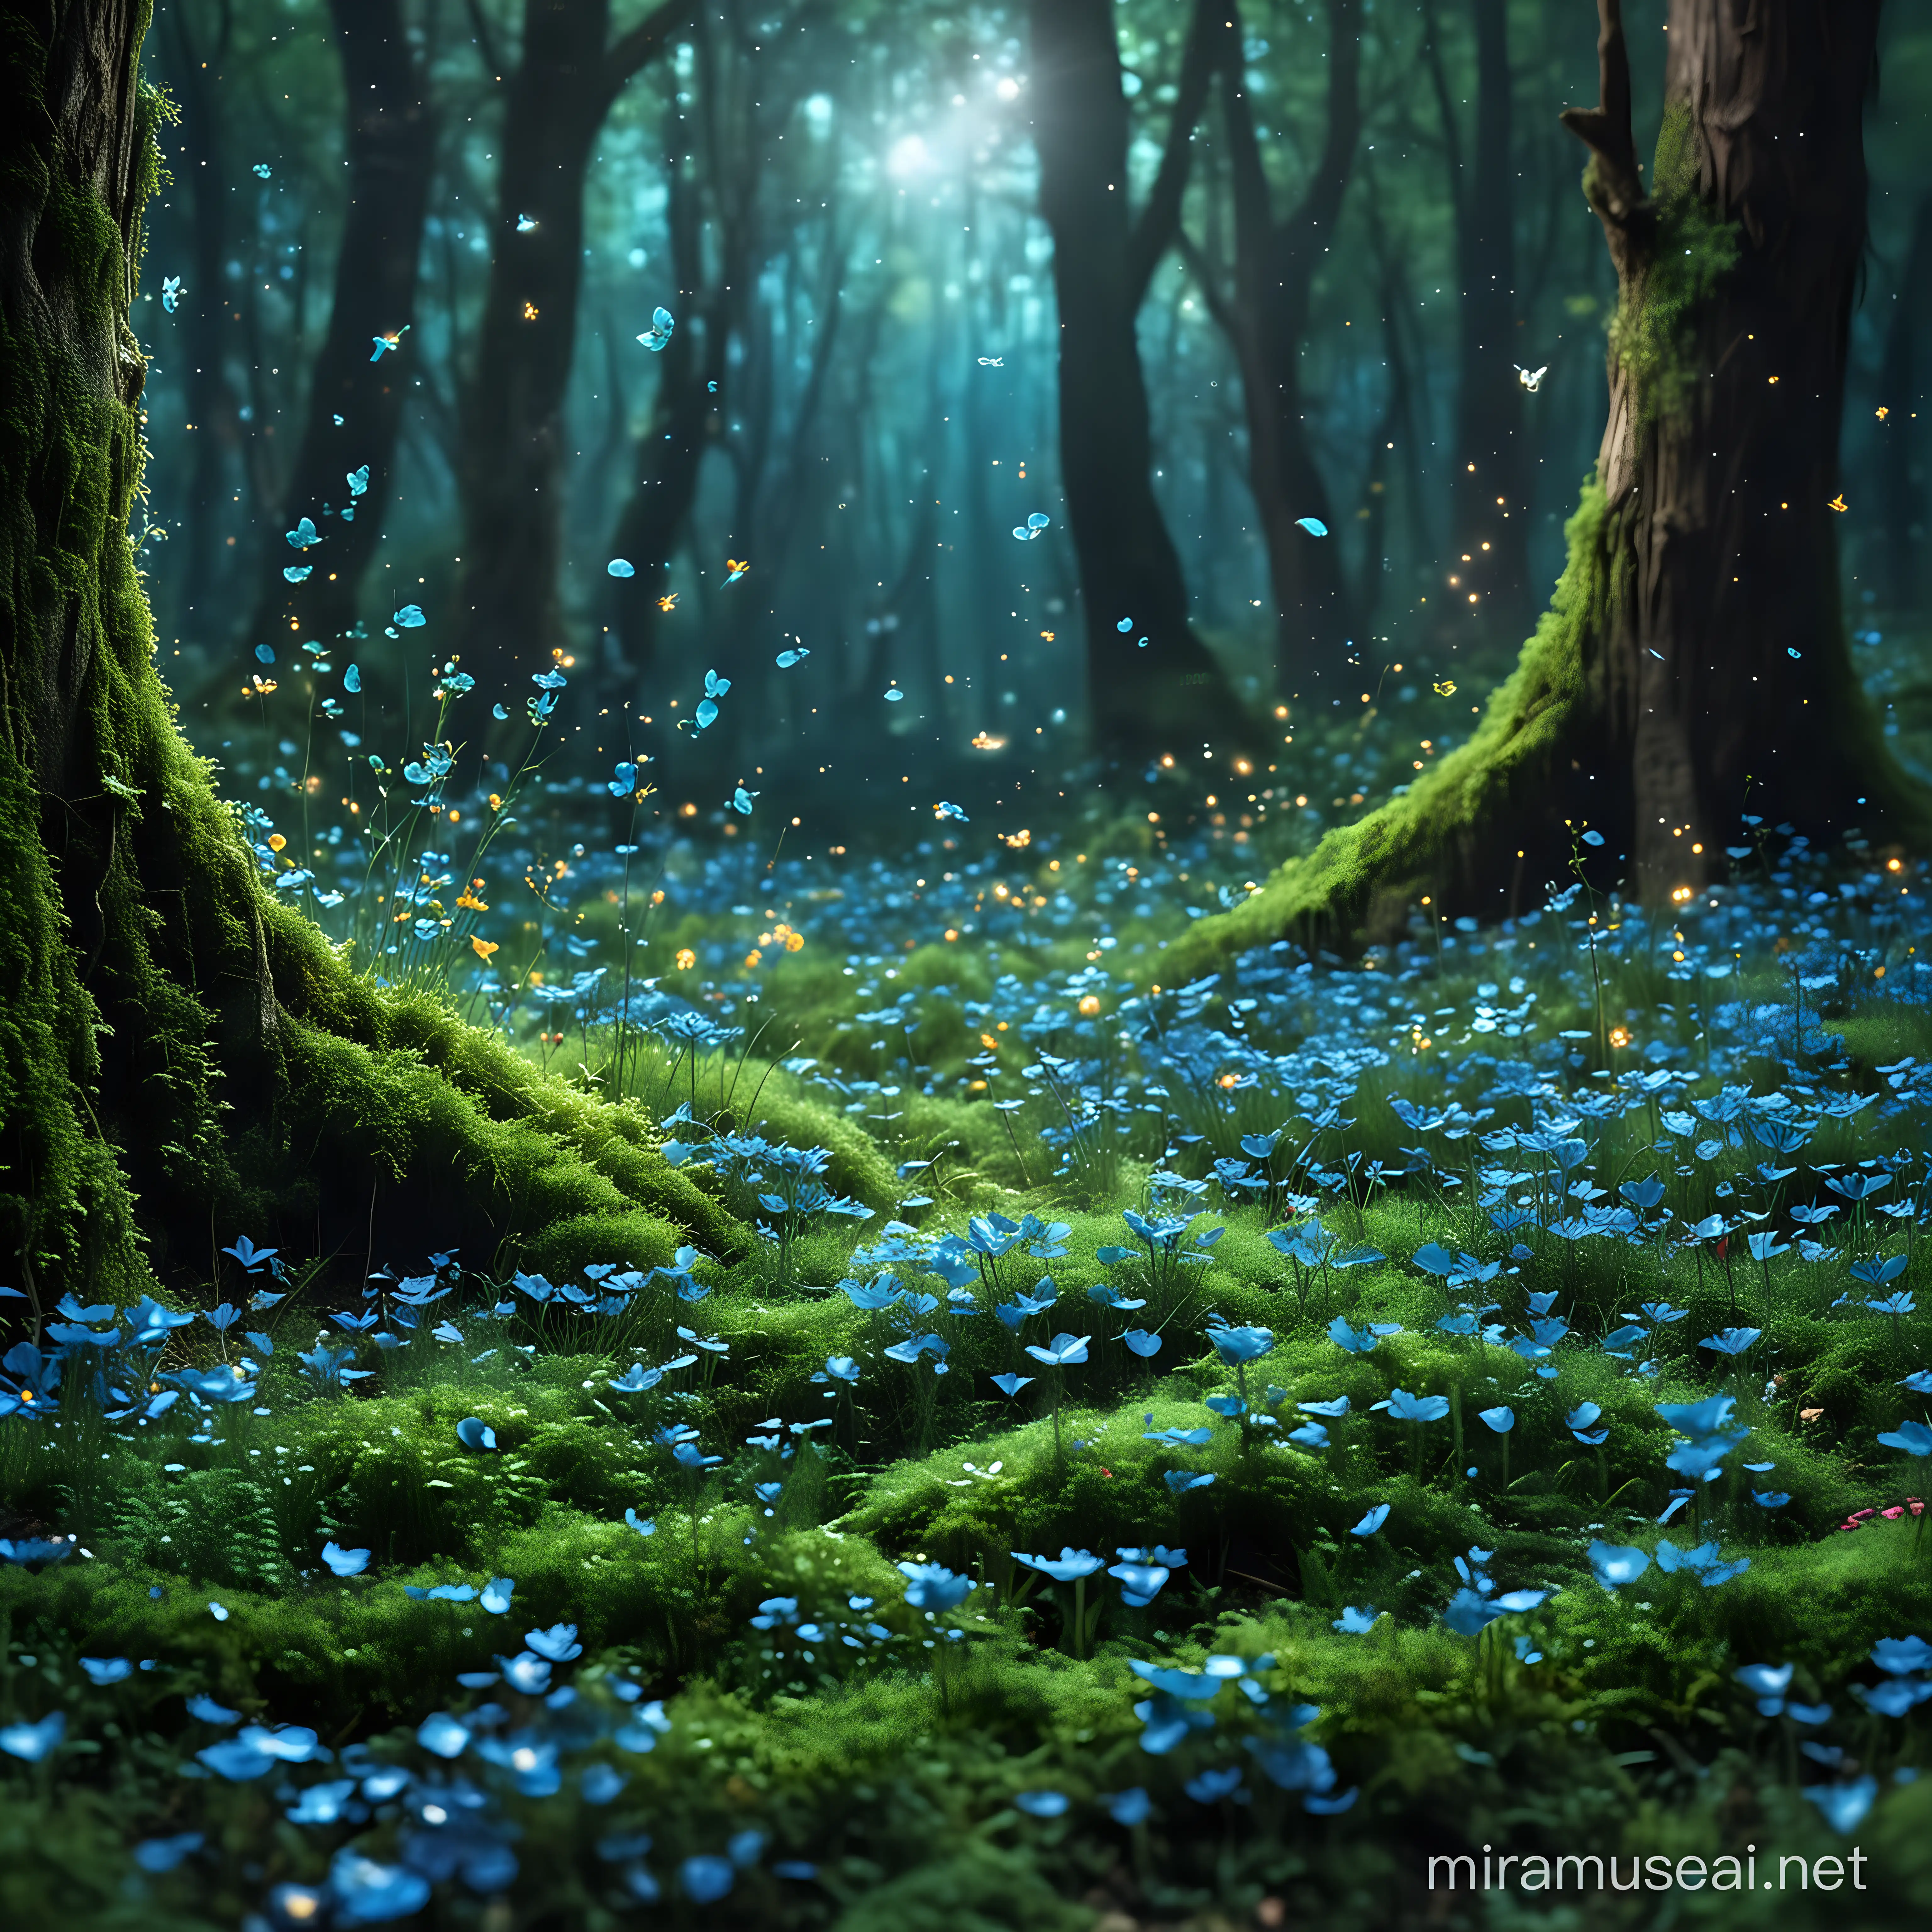 enchanted background with ombre of blue beautiful vibrant flowers.  Wide trunk tress with beautiful vibrant green moss. tiny  glowing fairies flying around. creates a whimsical peaceful inviting feeling
